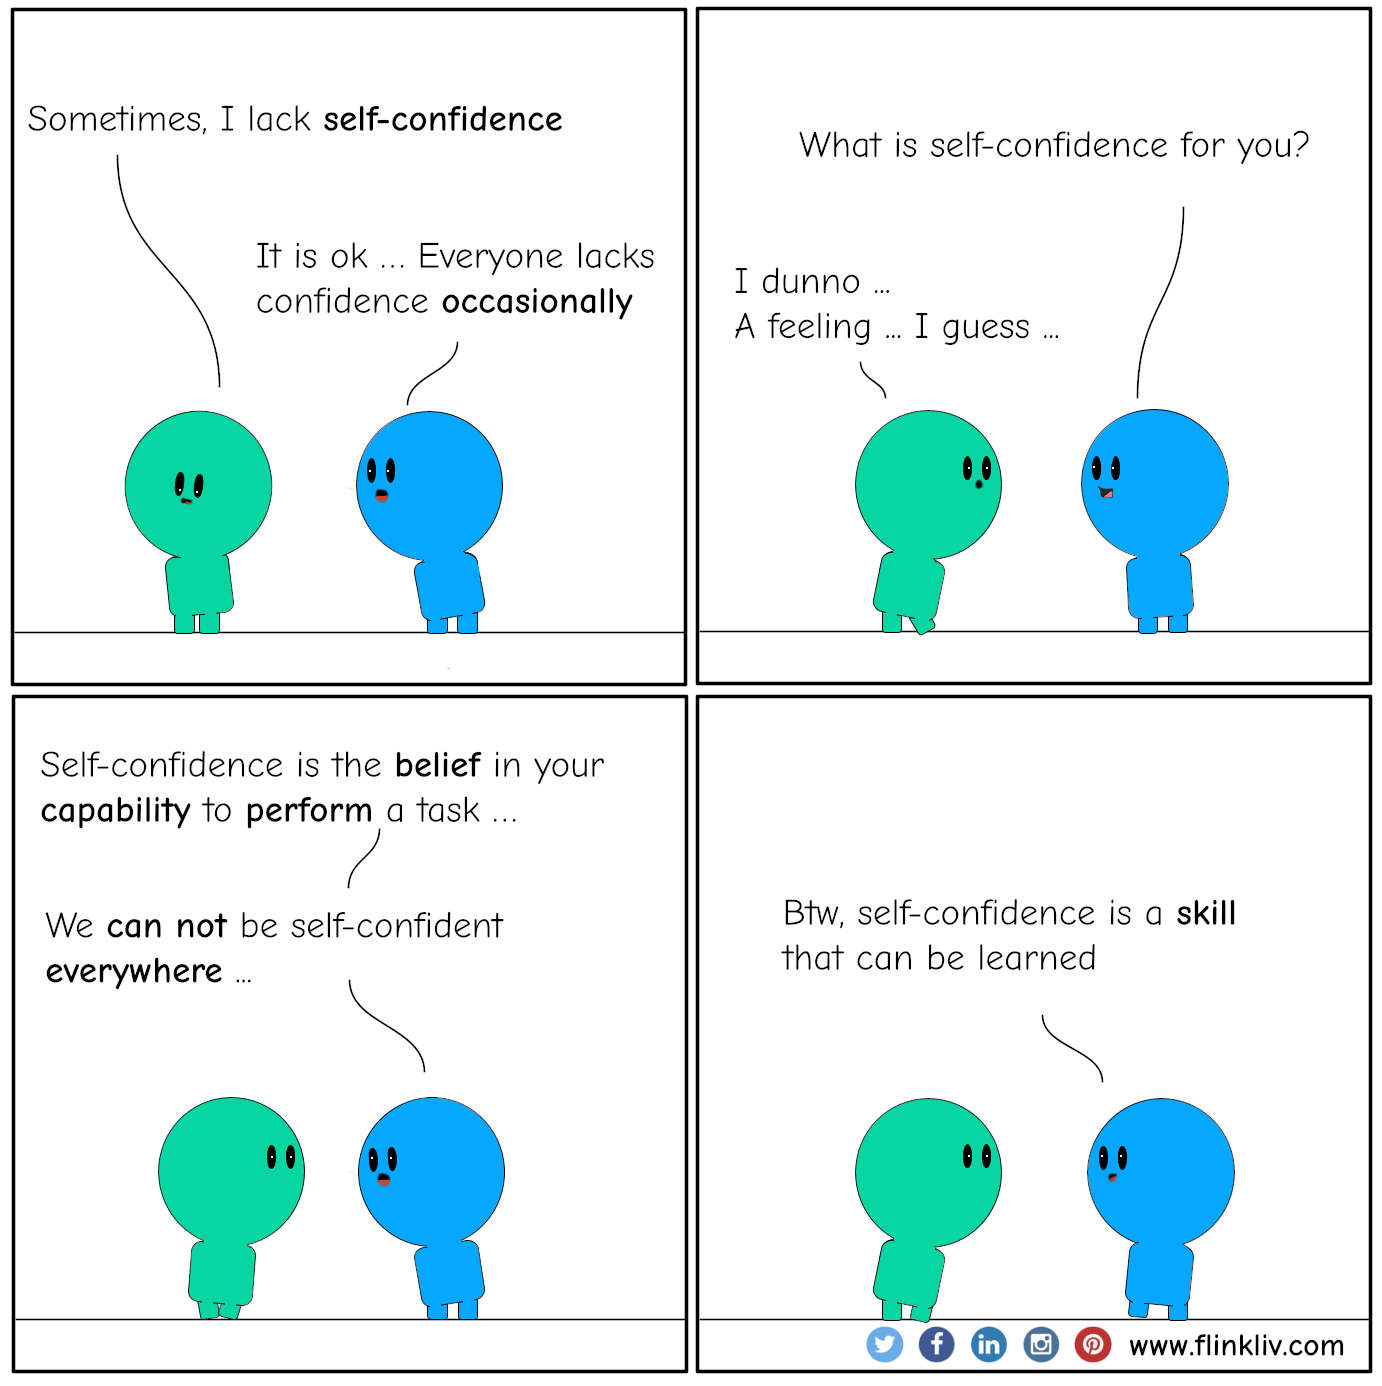 Conversation between A and B about Self-confidence. A: Sometimes, I lack self-confidence B: It is ok; everyone lacks confidence occasionally B: just to be sure, what is self-confidence for you? A: I dunno, a feeling, I guess. B: Self-confidence is the belief in your capability to perform a task. B: We can not be self-confident everywhere B: Btw, self-confidence is a skill that can be learned. By flinkliv.com